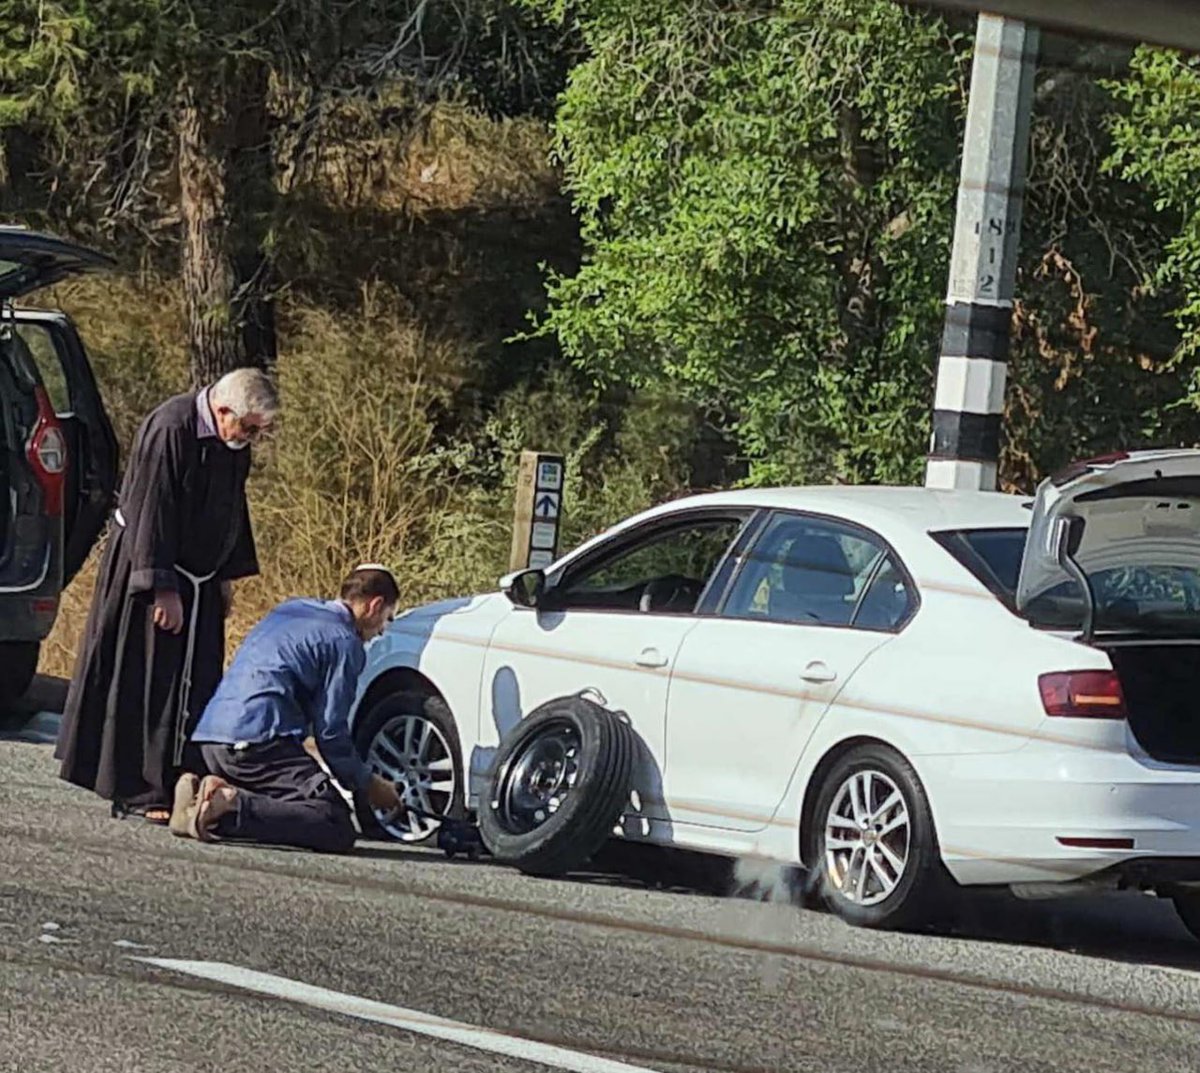 🇮🇱Only in Israel: Lovely picture of a Christian man who gets help from a religious Jew with his car in Israel. Nice to see that picture, when you otherwise hear negative news about Israel in the media.

#Israel #religioustolerance #MiddleEast #Christians #Jews